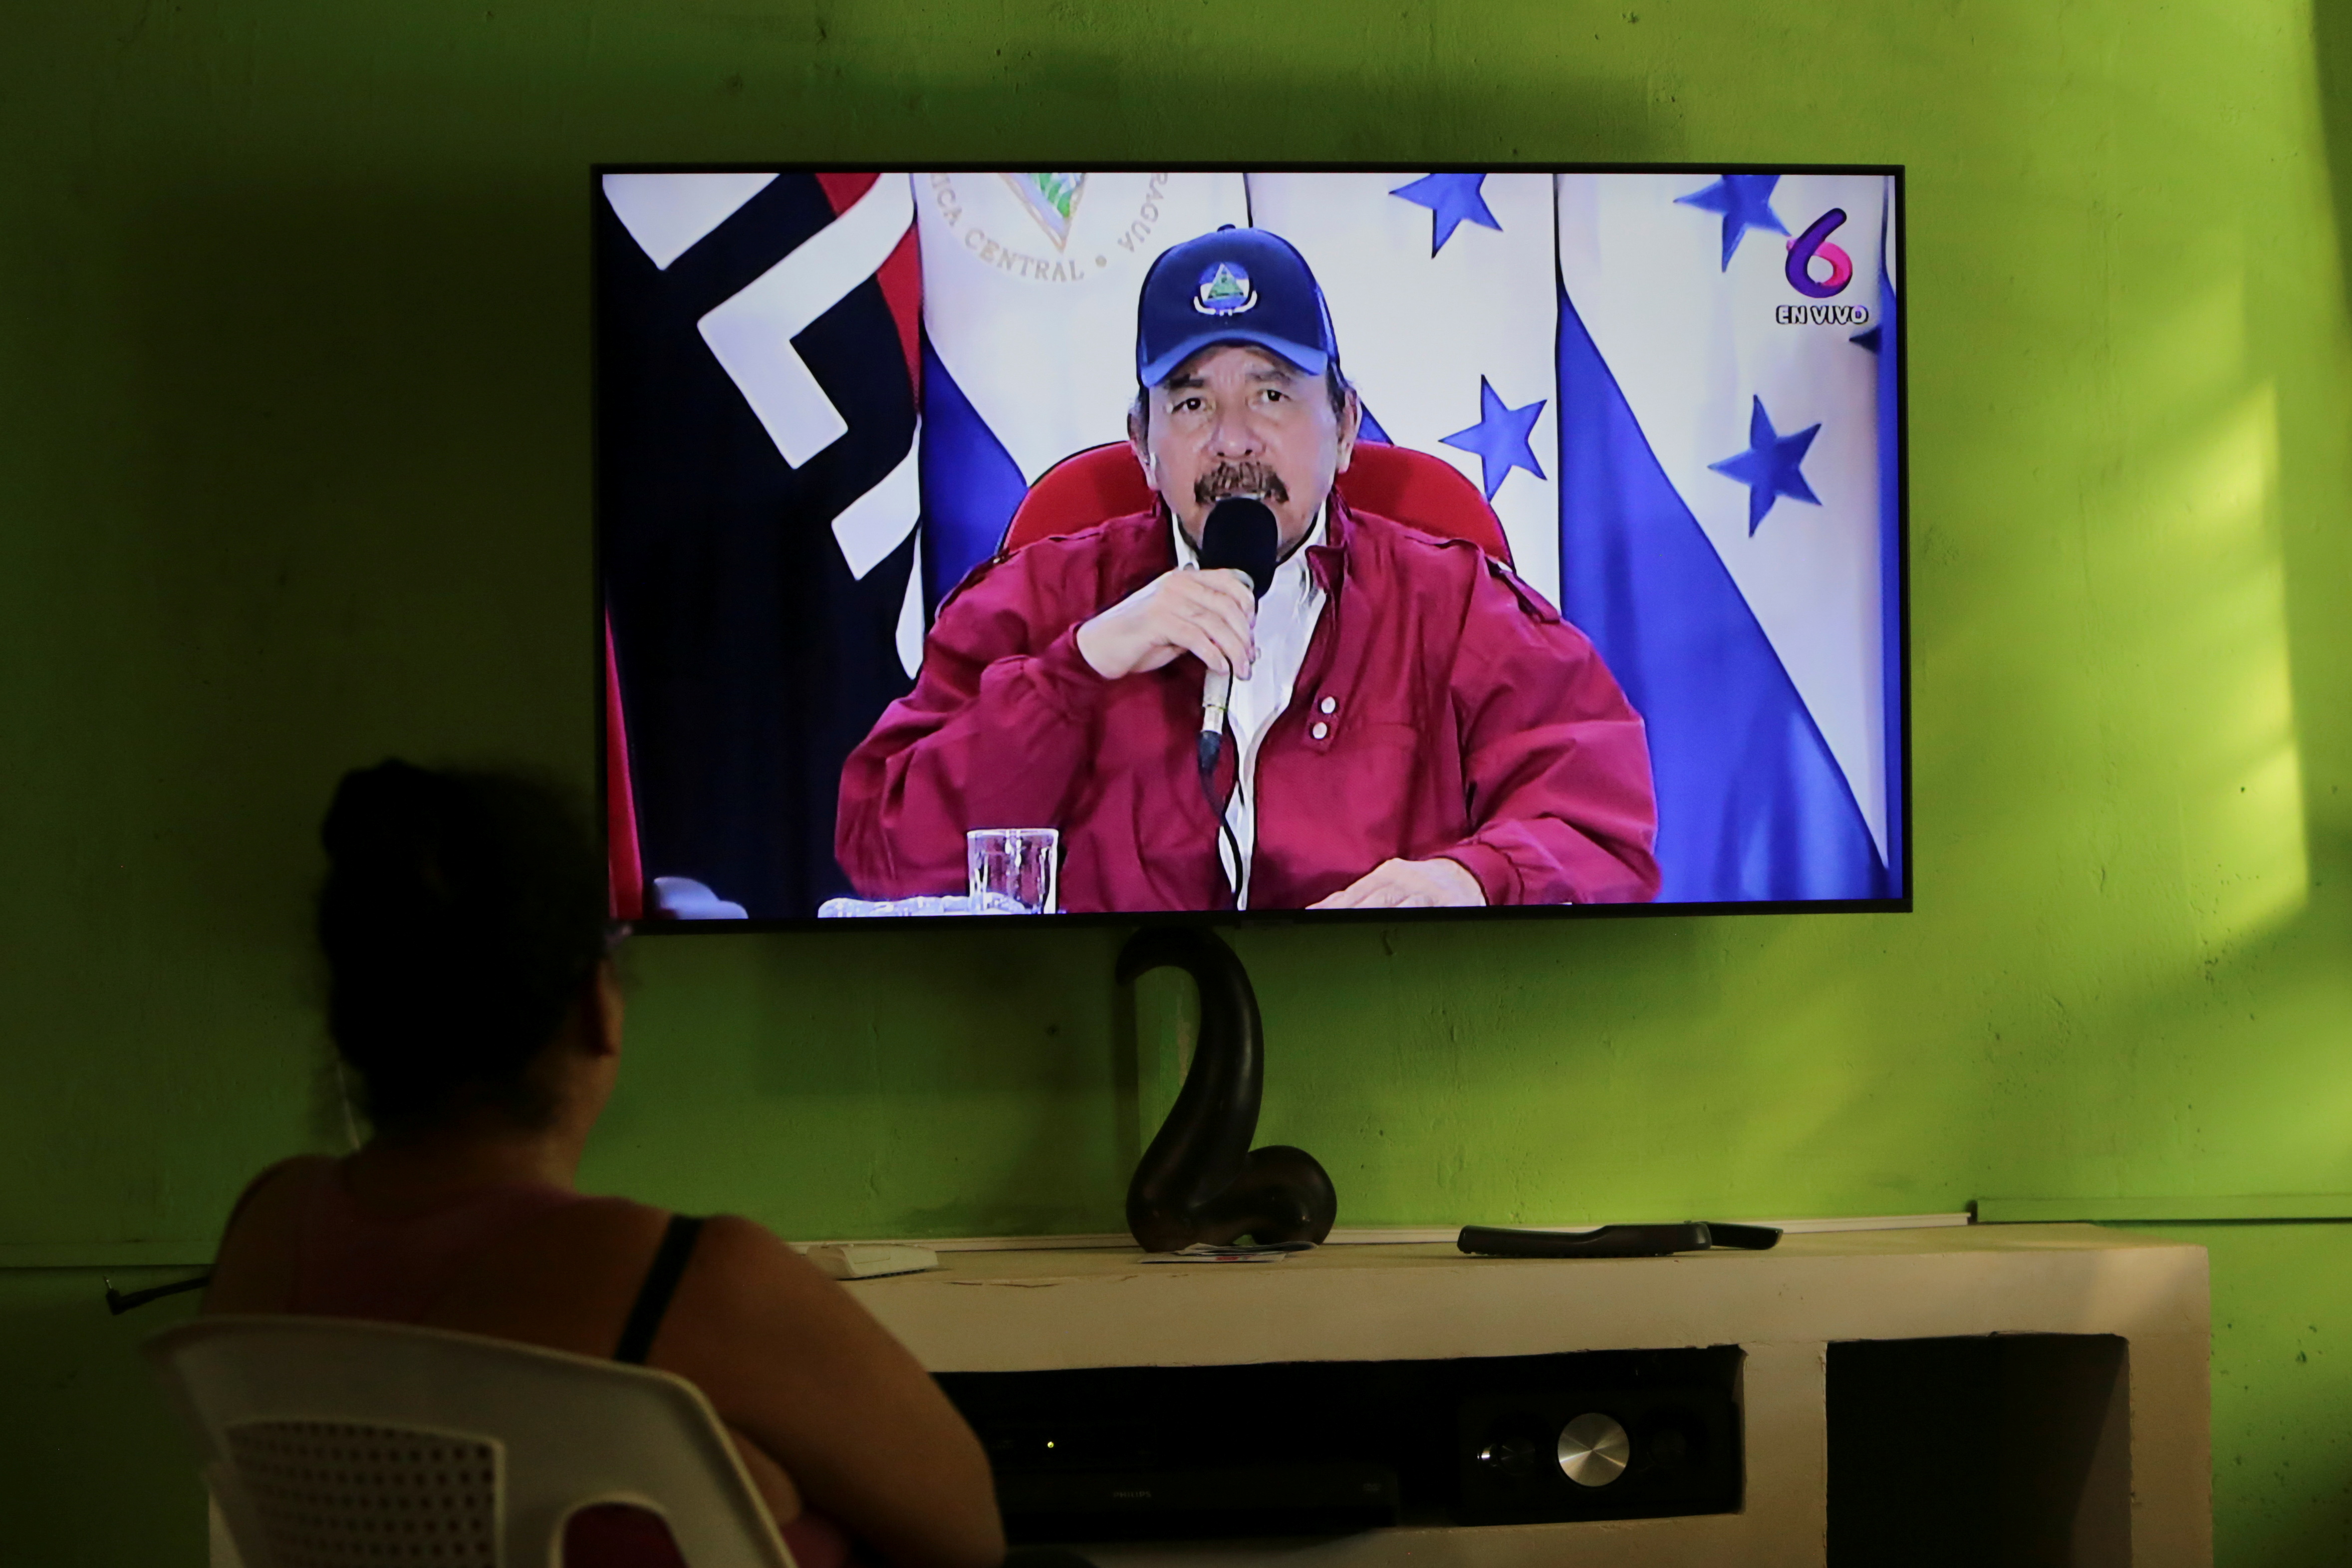 A woman watches a televised speech by Nicaraguan President Daniel Ortega during an event where he agreed with his Honduran counterpart Juan Orlando Hernandez to define their borders in the Caribbean Sea and the Pacific Ocean, including the Gulf of Fonseca, which they share with El Salvador, in Managua, Nicaragua October 27, 2021. REUTERS/Maynor Valenzuela/File Photo